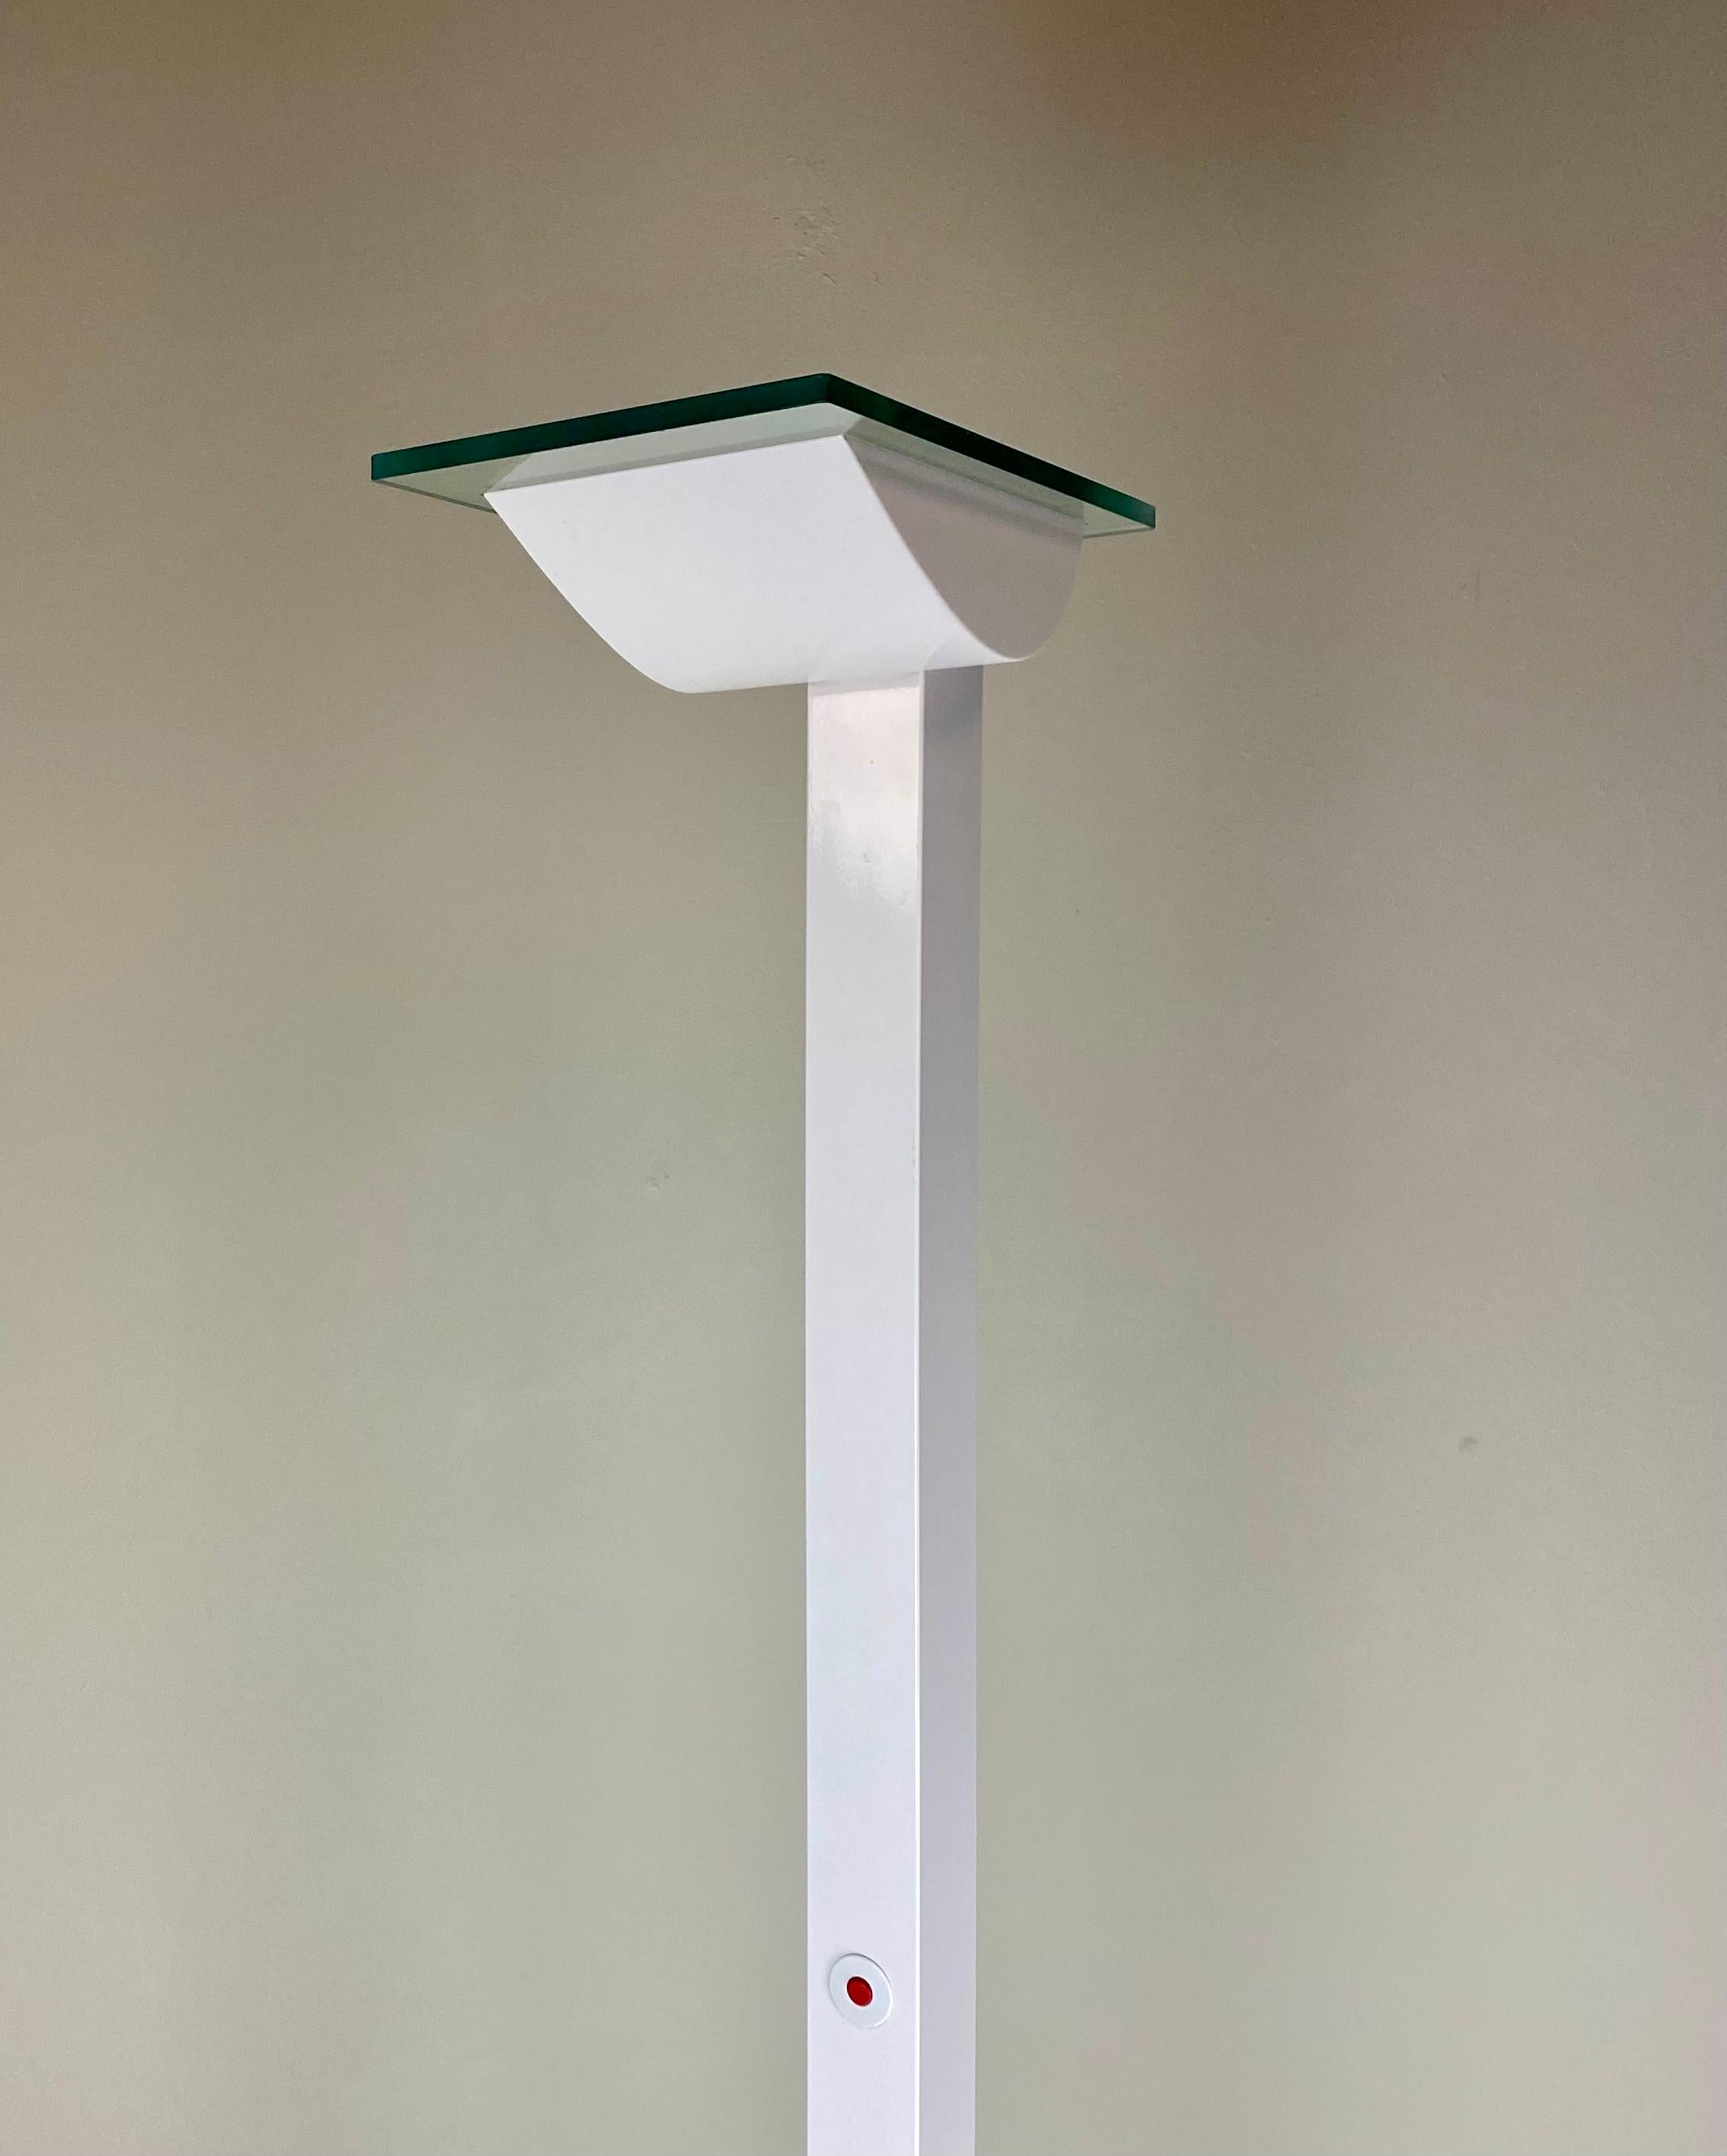 Staff 'Zumtobel' ID-S Floor Lamp/ Uplighter by Ettore Sottsass, Memphis, 1980s In Good Condition For Sale In CULEMBORG, GE